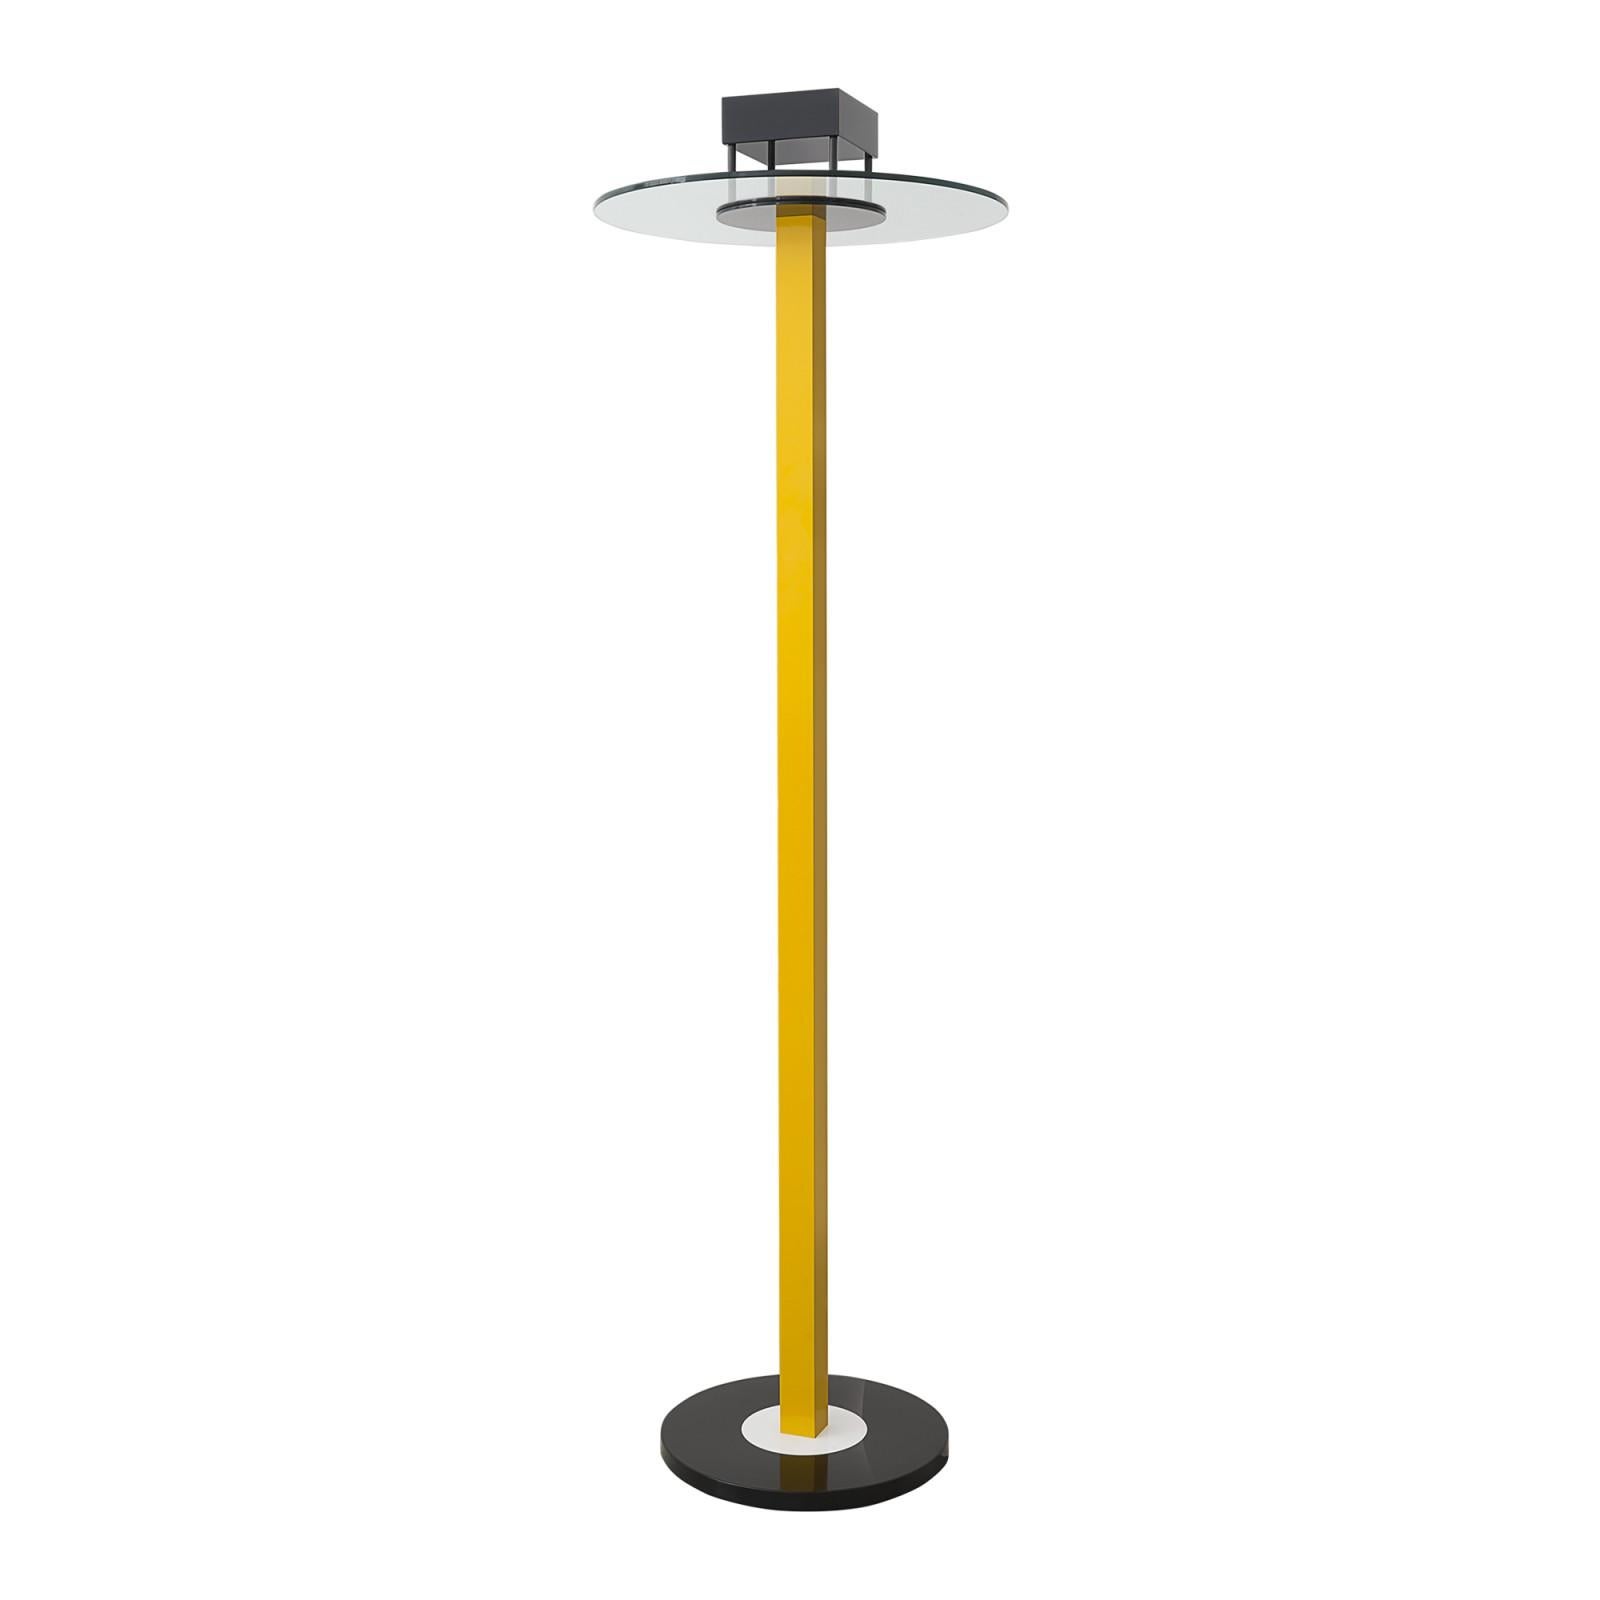 King's Floor Lamp EU 220 V. by Ettore Sottsass for Memphis Milano Collection